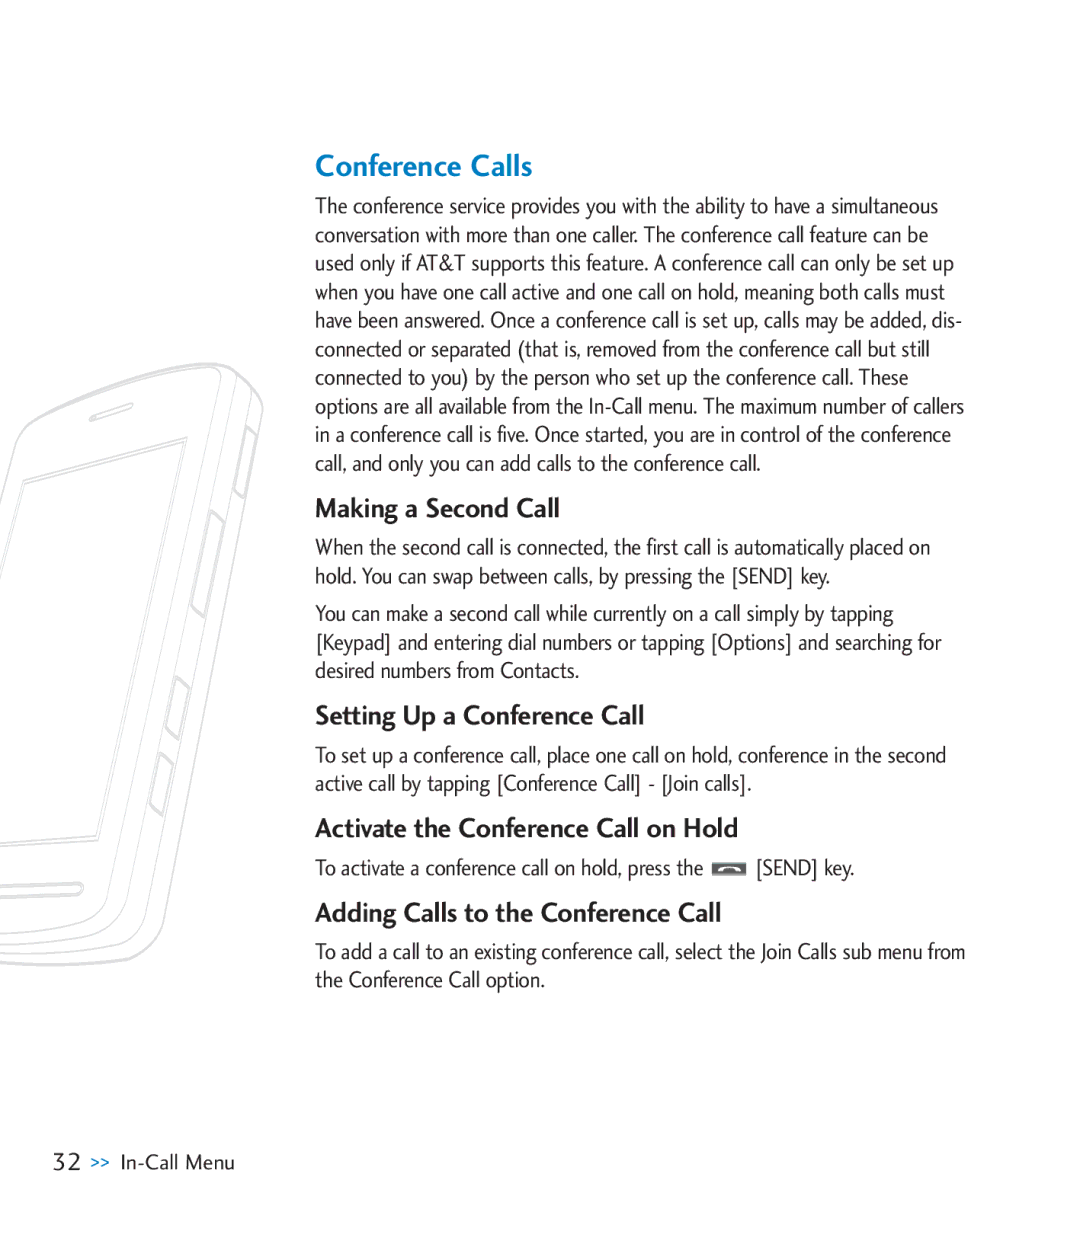 LG Electronics CU920 manual Conference Calls, Making a Second Call, Setting Up a Conference Call 